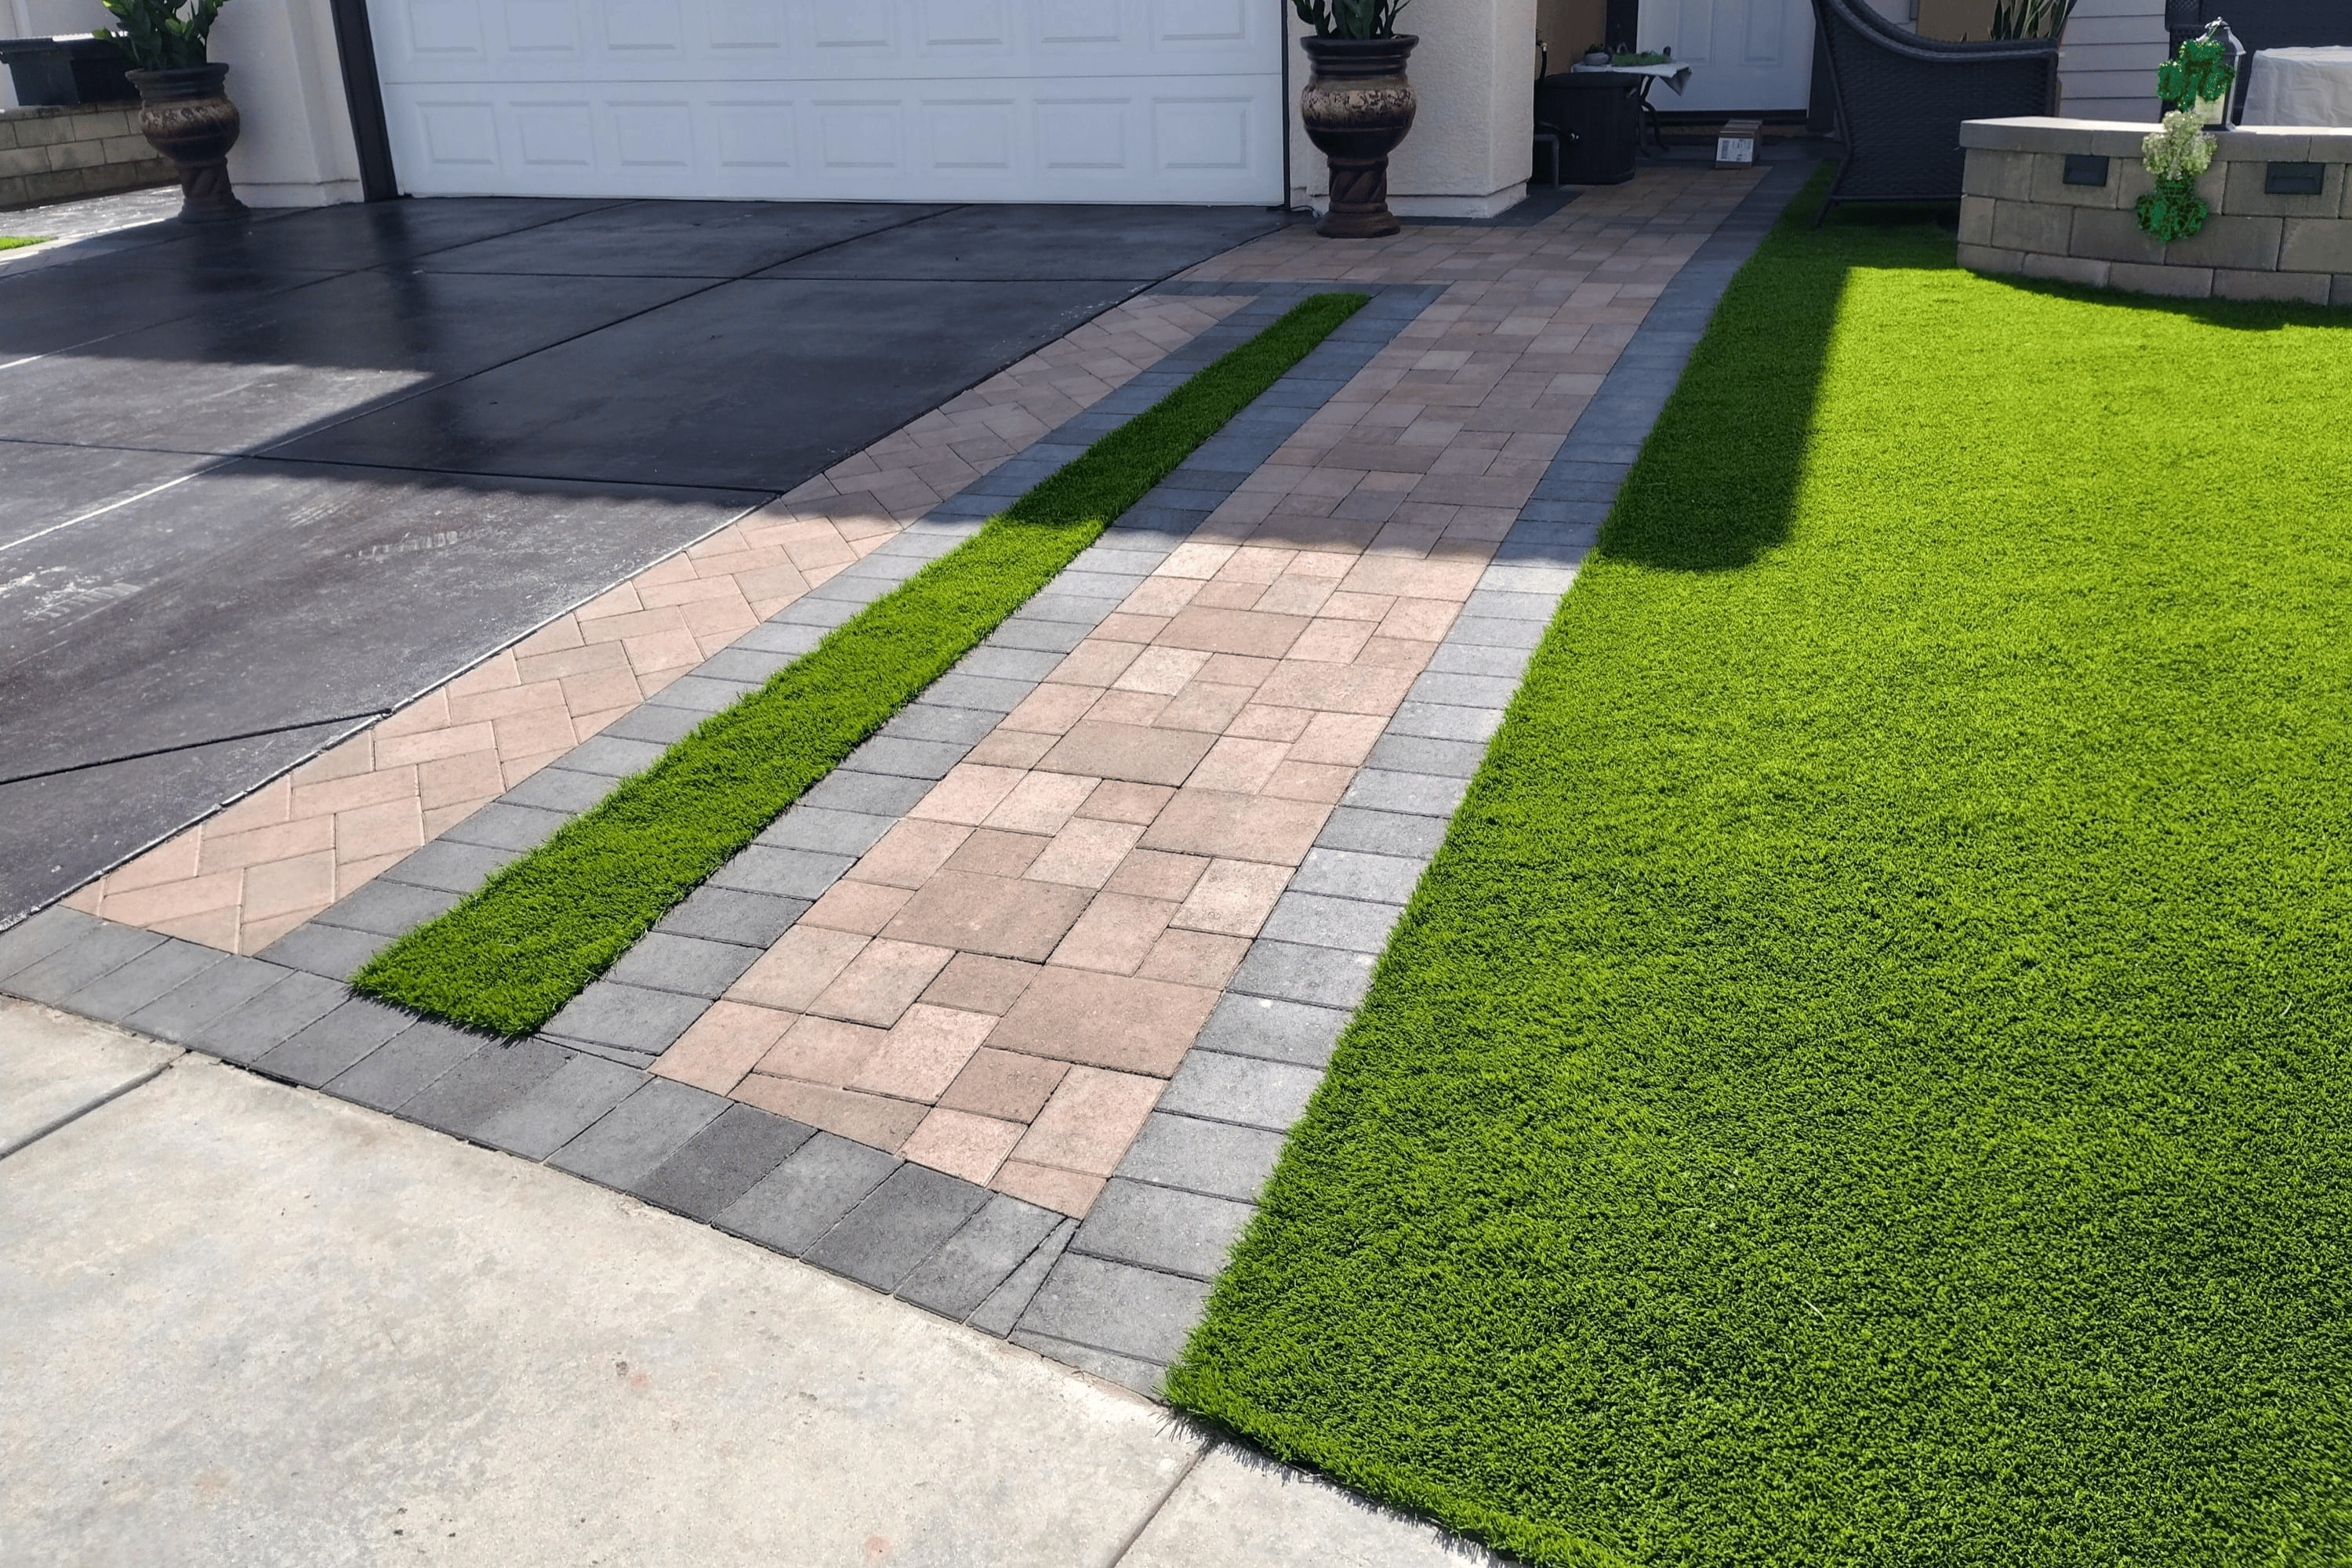 artificial turf installation cost in San Diego, artificial turf installation san Diego, turf installation san Diego, Turf Specialist San Diego, Artificial Turf Installer San Diego